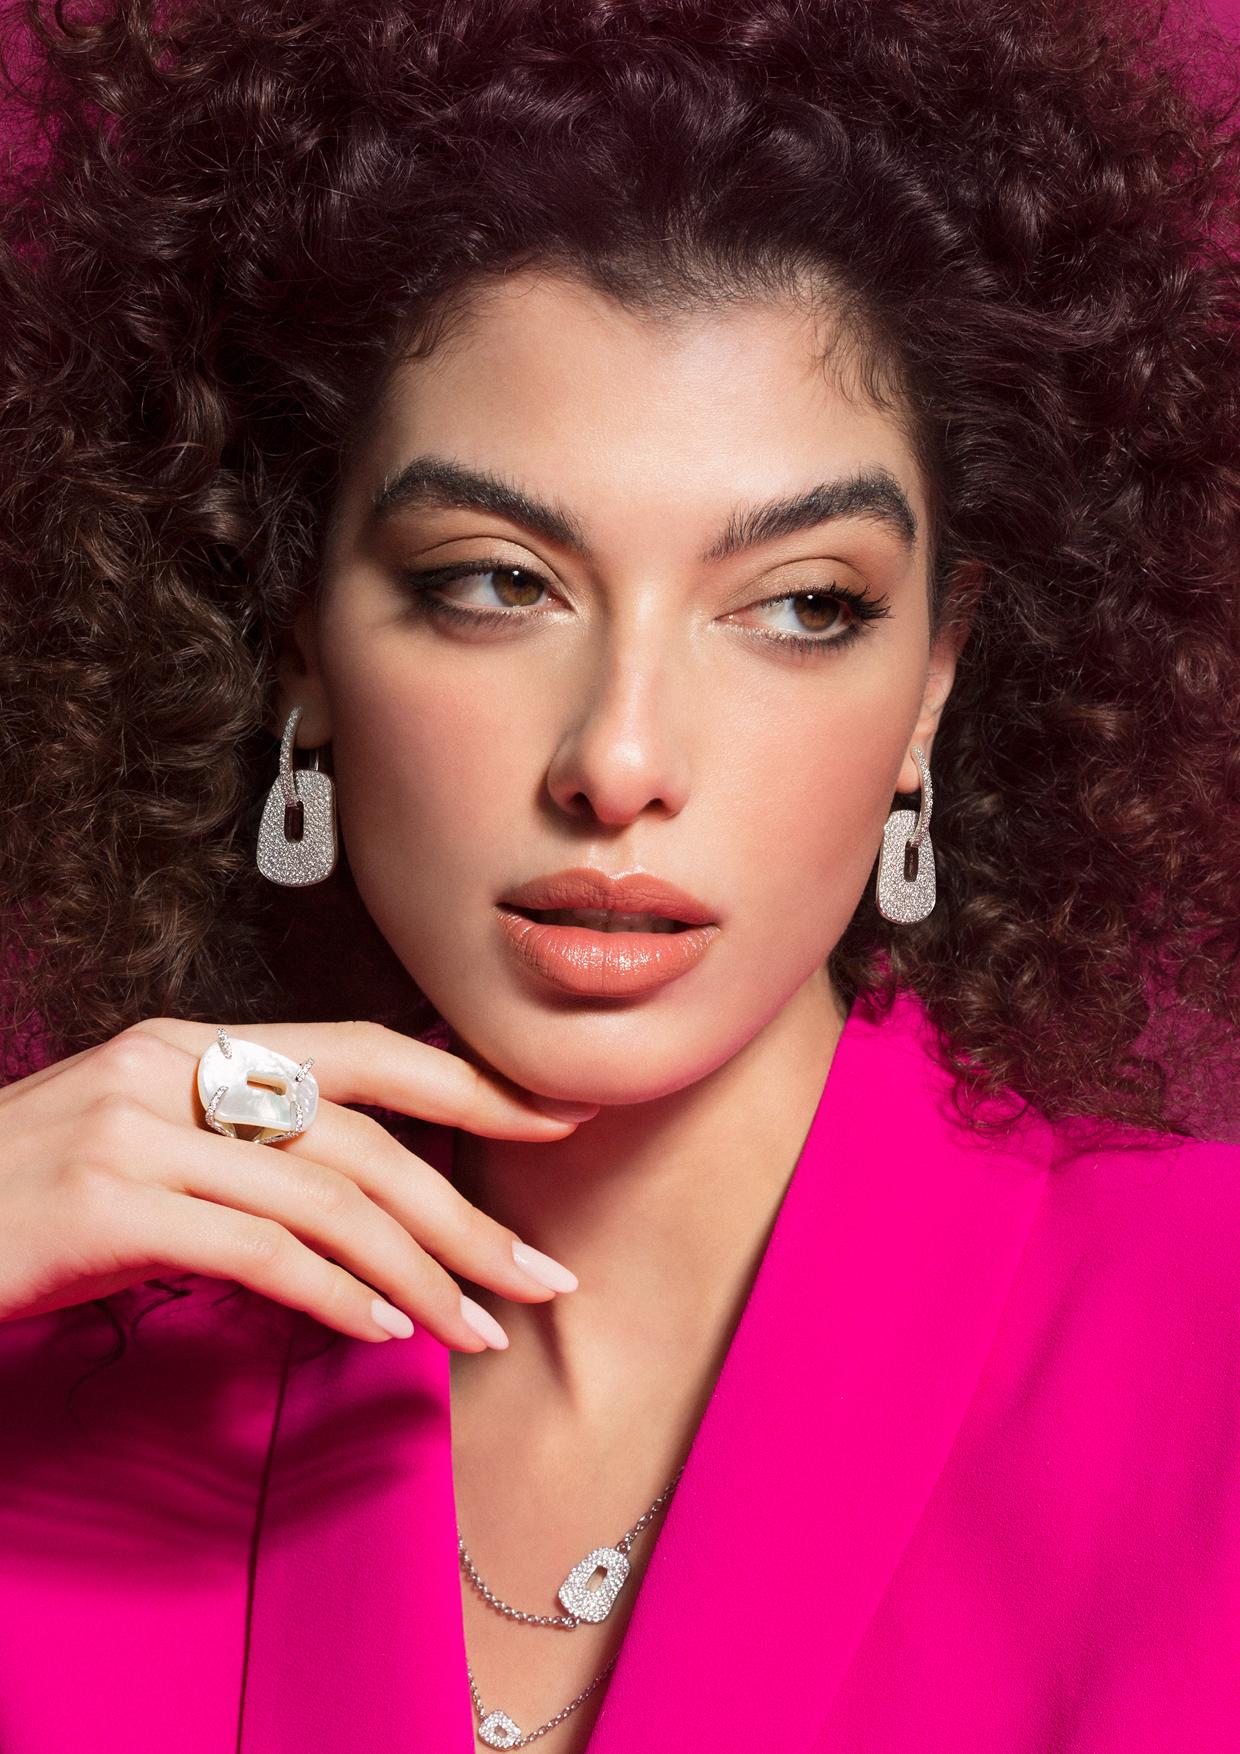 Earrings in rose gold and brown diamonds (carats 0,30)
Also available in white gold, brown diamonds

EVE_R COLLECTION
The edgy and modern colors of turquoise, onyx and coral give life to Eve_r. The new collection is inspired by the iconic and